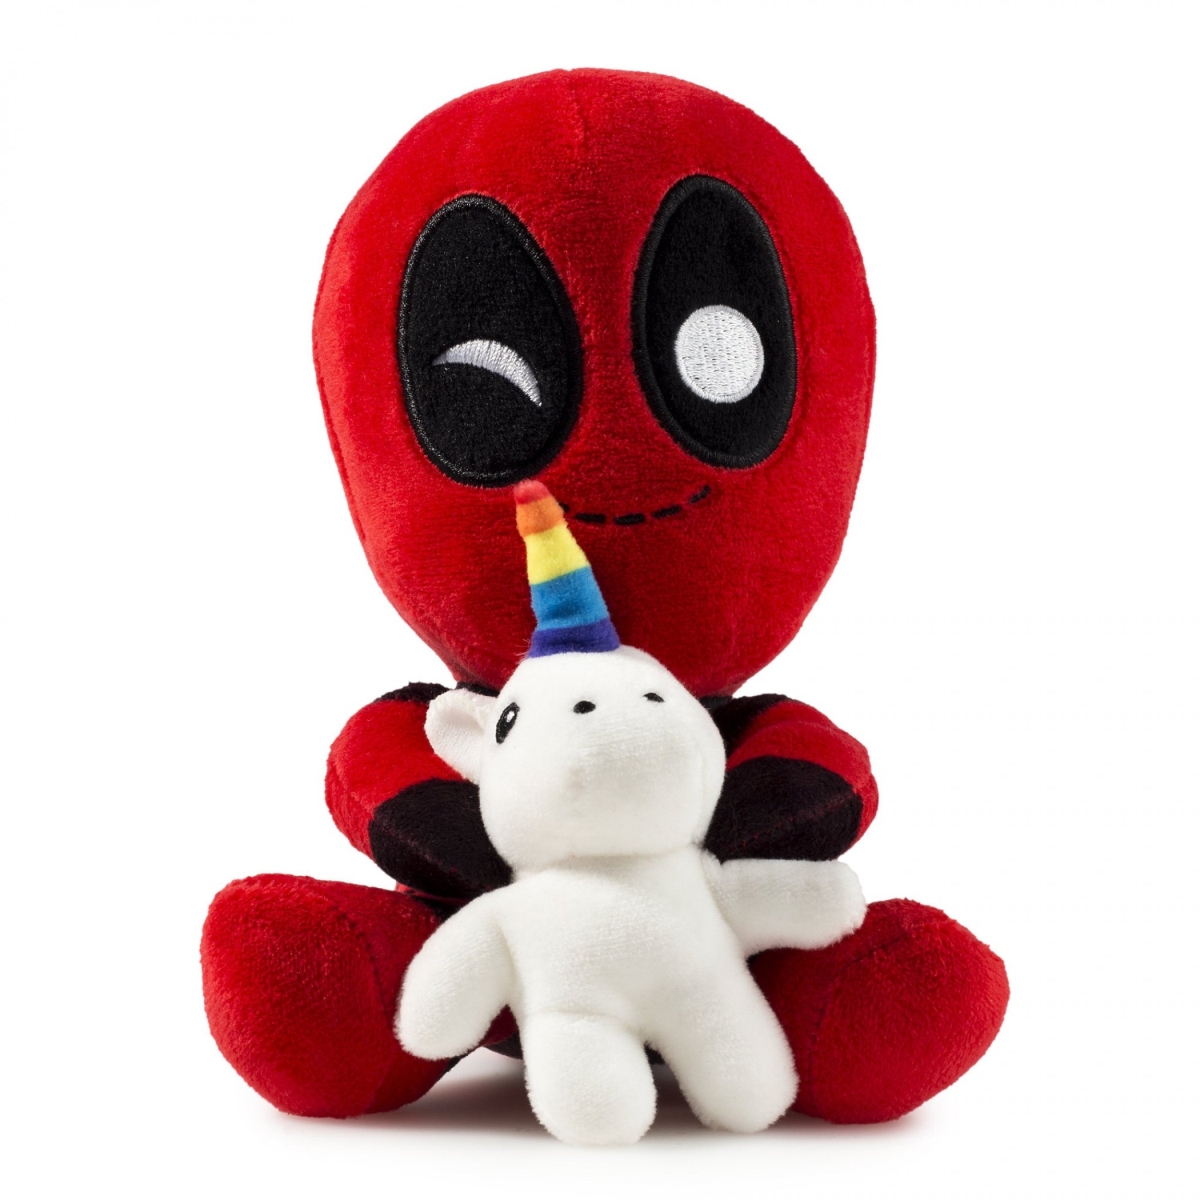 Picture of Deadpool 847352 7 in. Marvel Comics with Unicorn KidRobot Plush Doll, Red